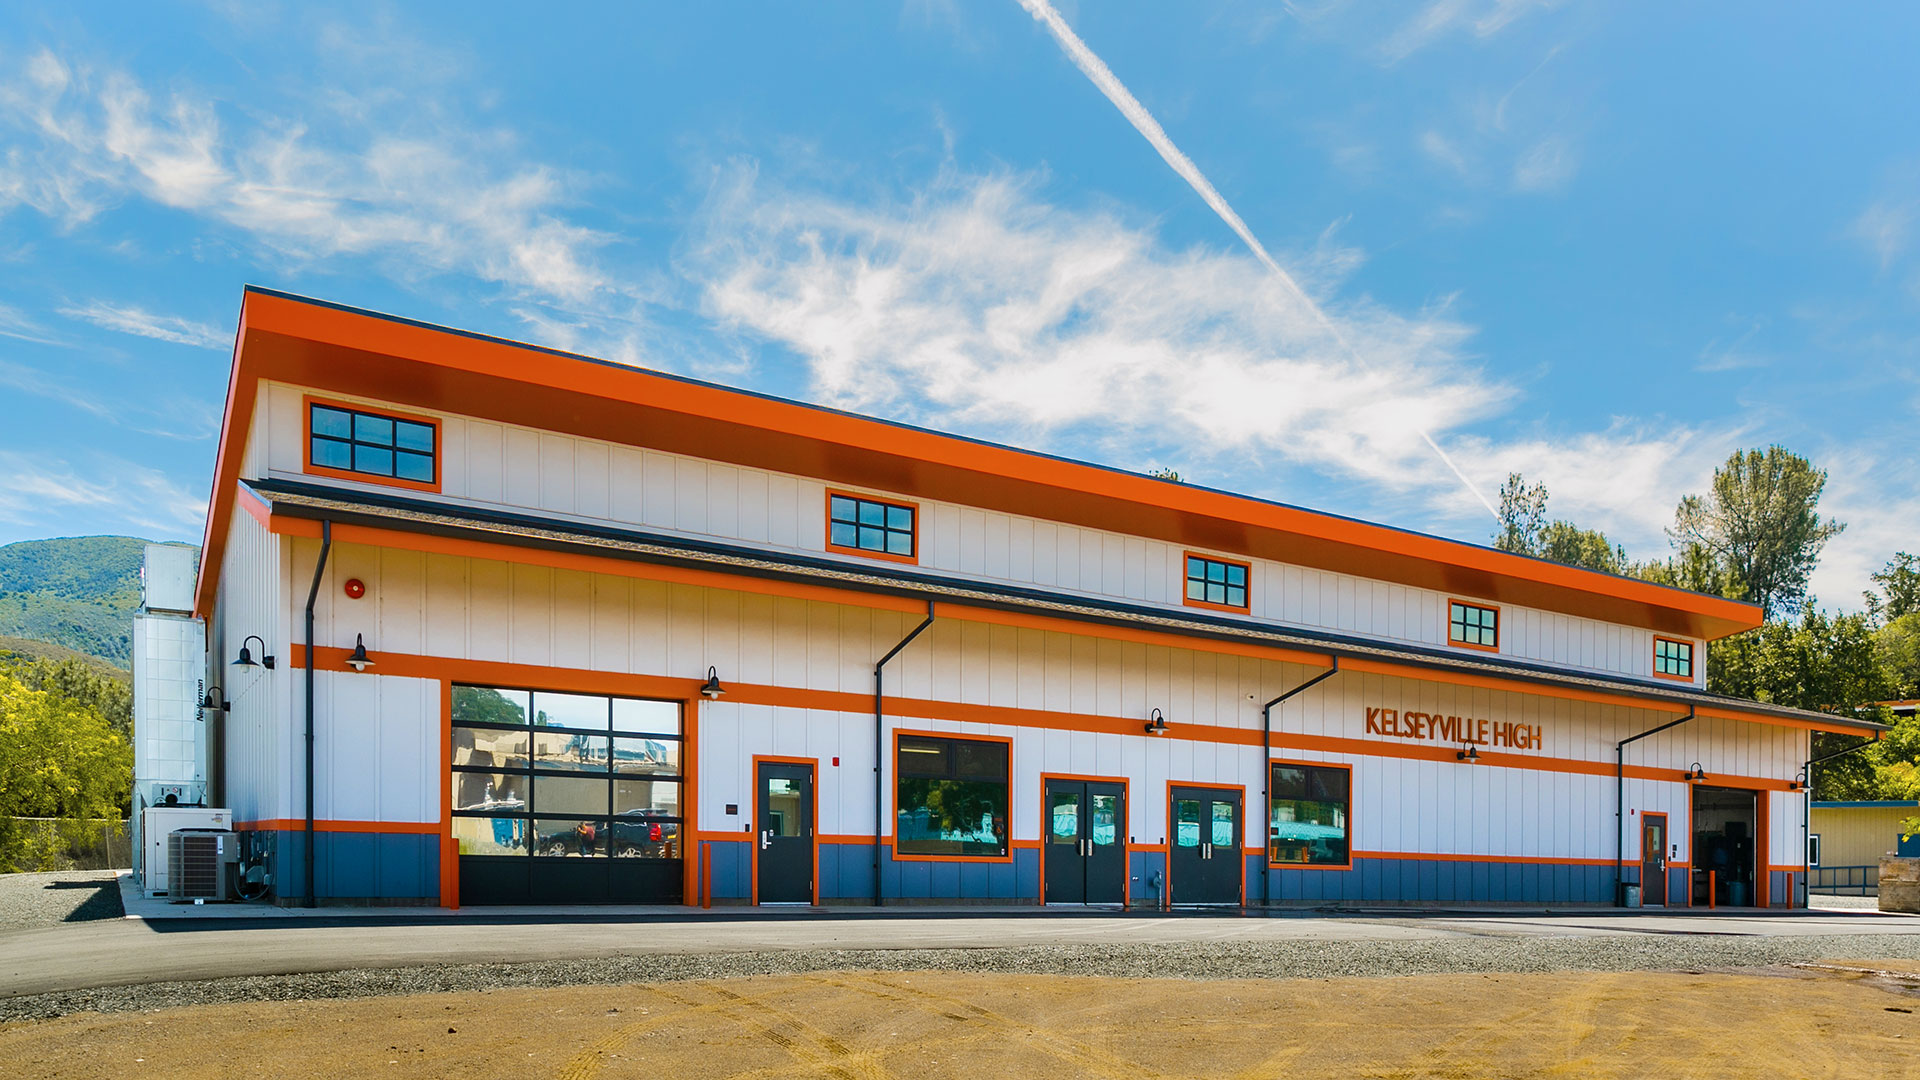 Exterior of shop building, white wood with orange trim and gray wainscot. Blue sky above.